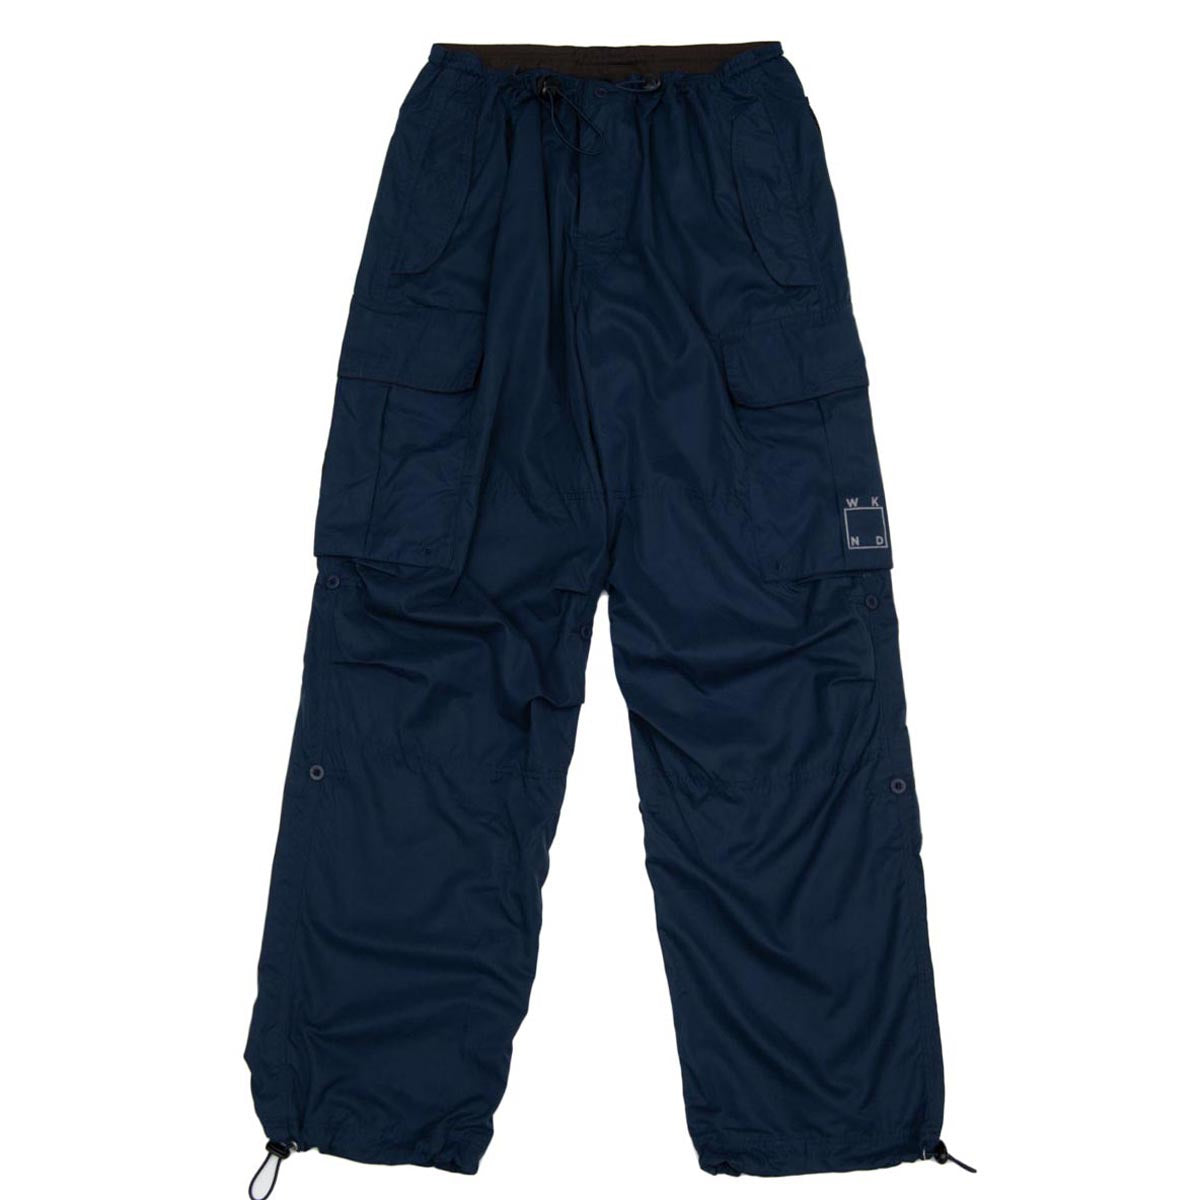 WKND Techie Dirtbags Pants - Navy image 1